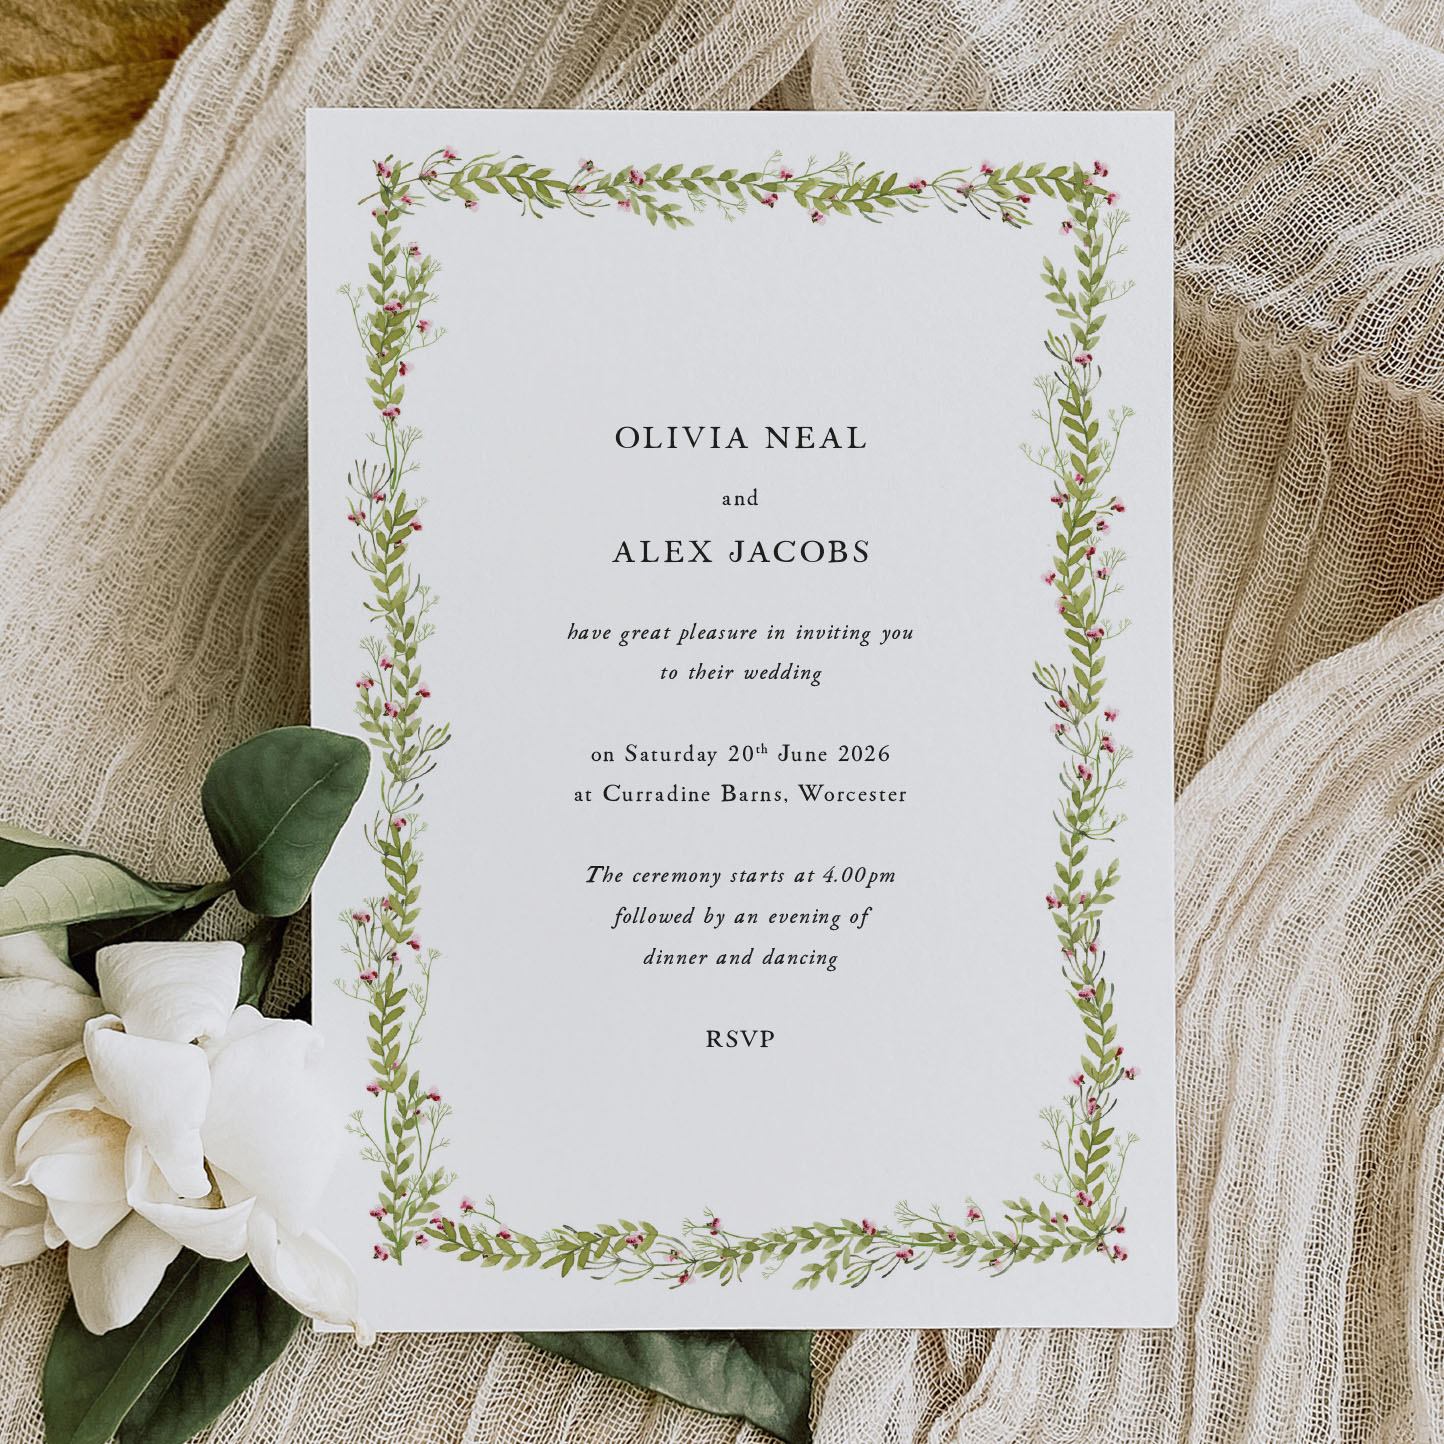 Showing Hedgerow - Rustic wedding invitations and stationery